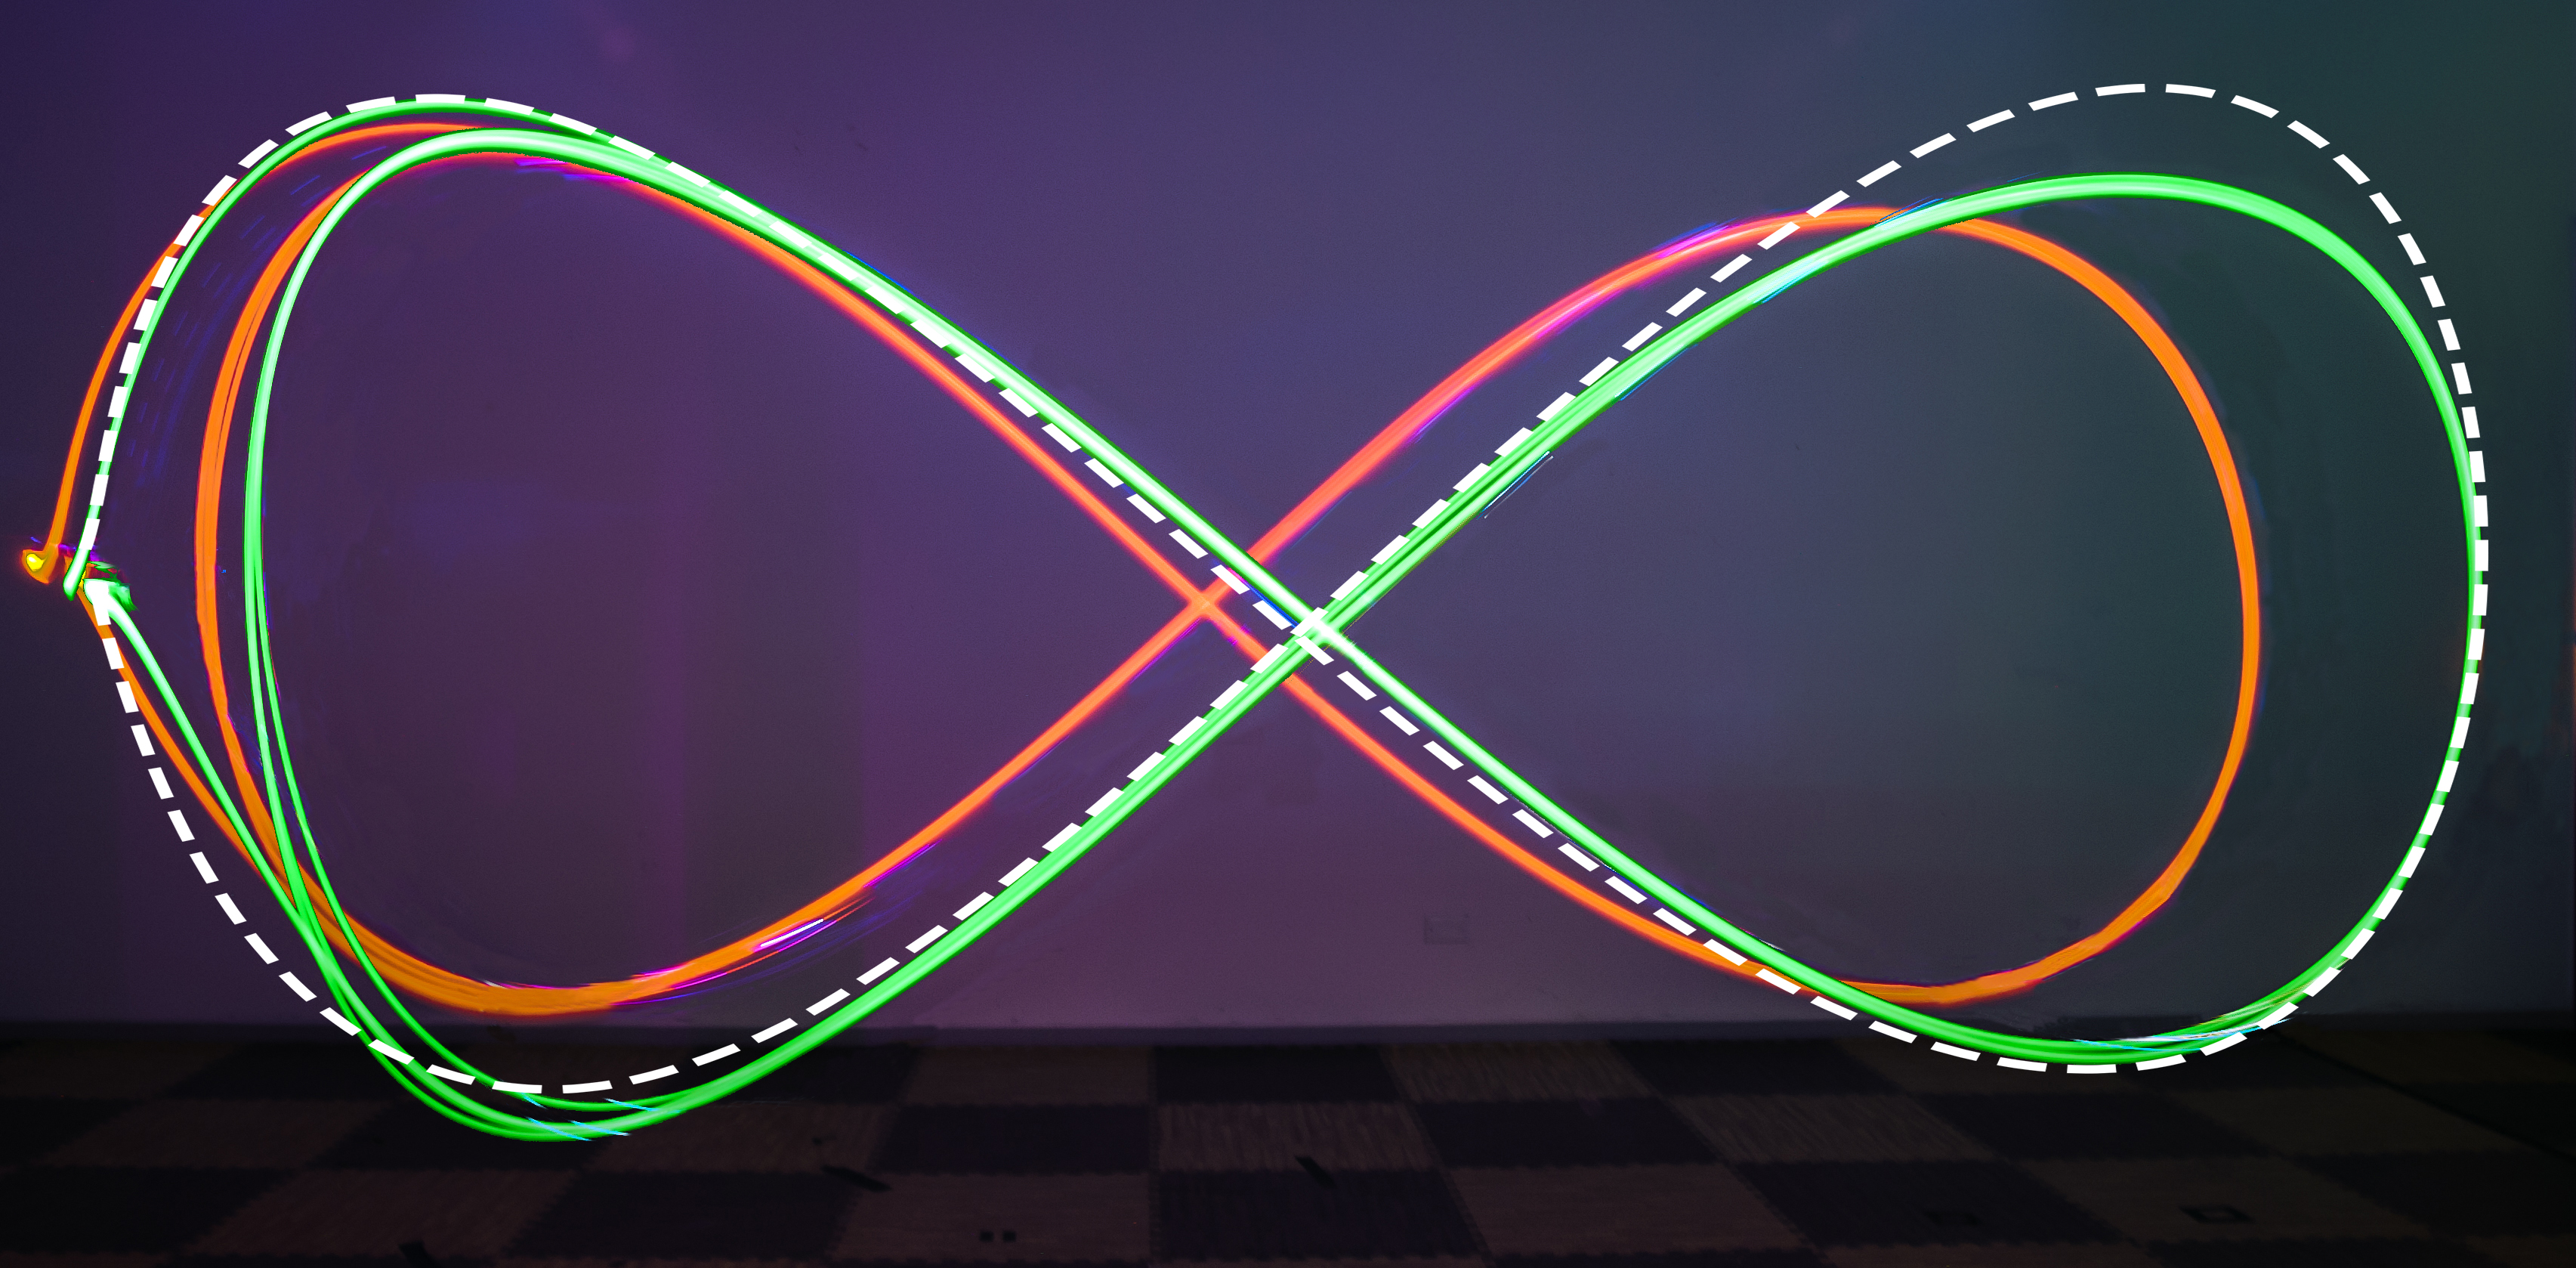 Long-exposure photo showing multiple laps over Lemniscate trajectory when using the nominal (NOM) and the proposed (PI-TCN) dynamics.